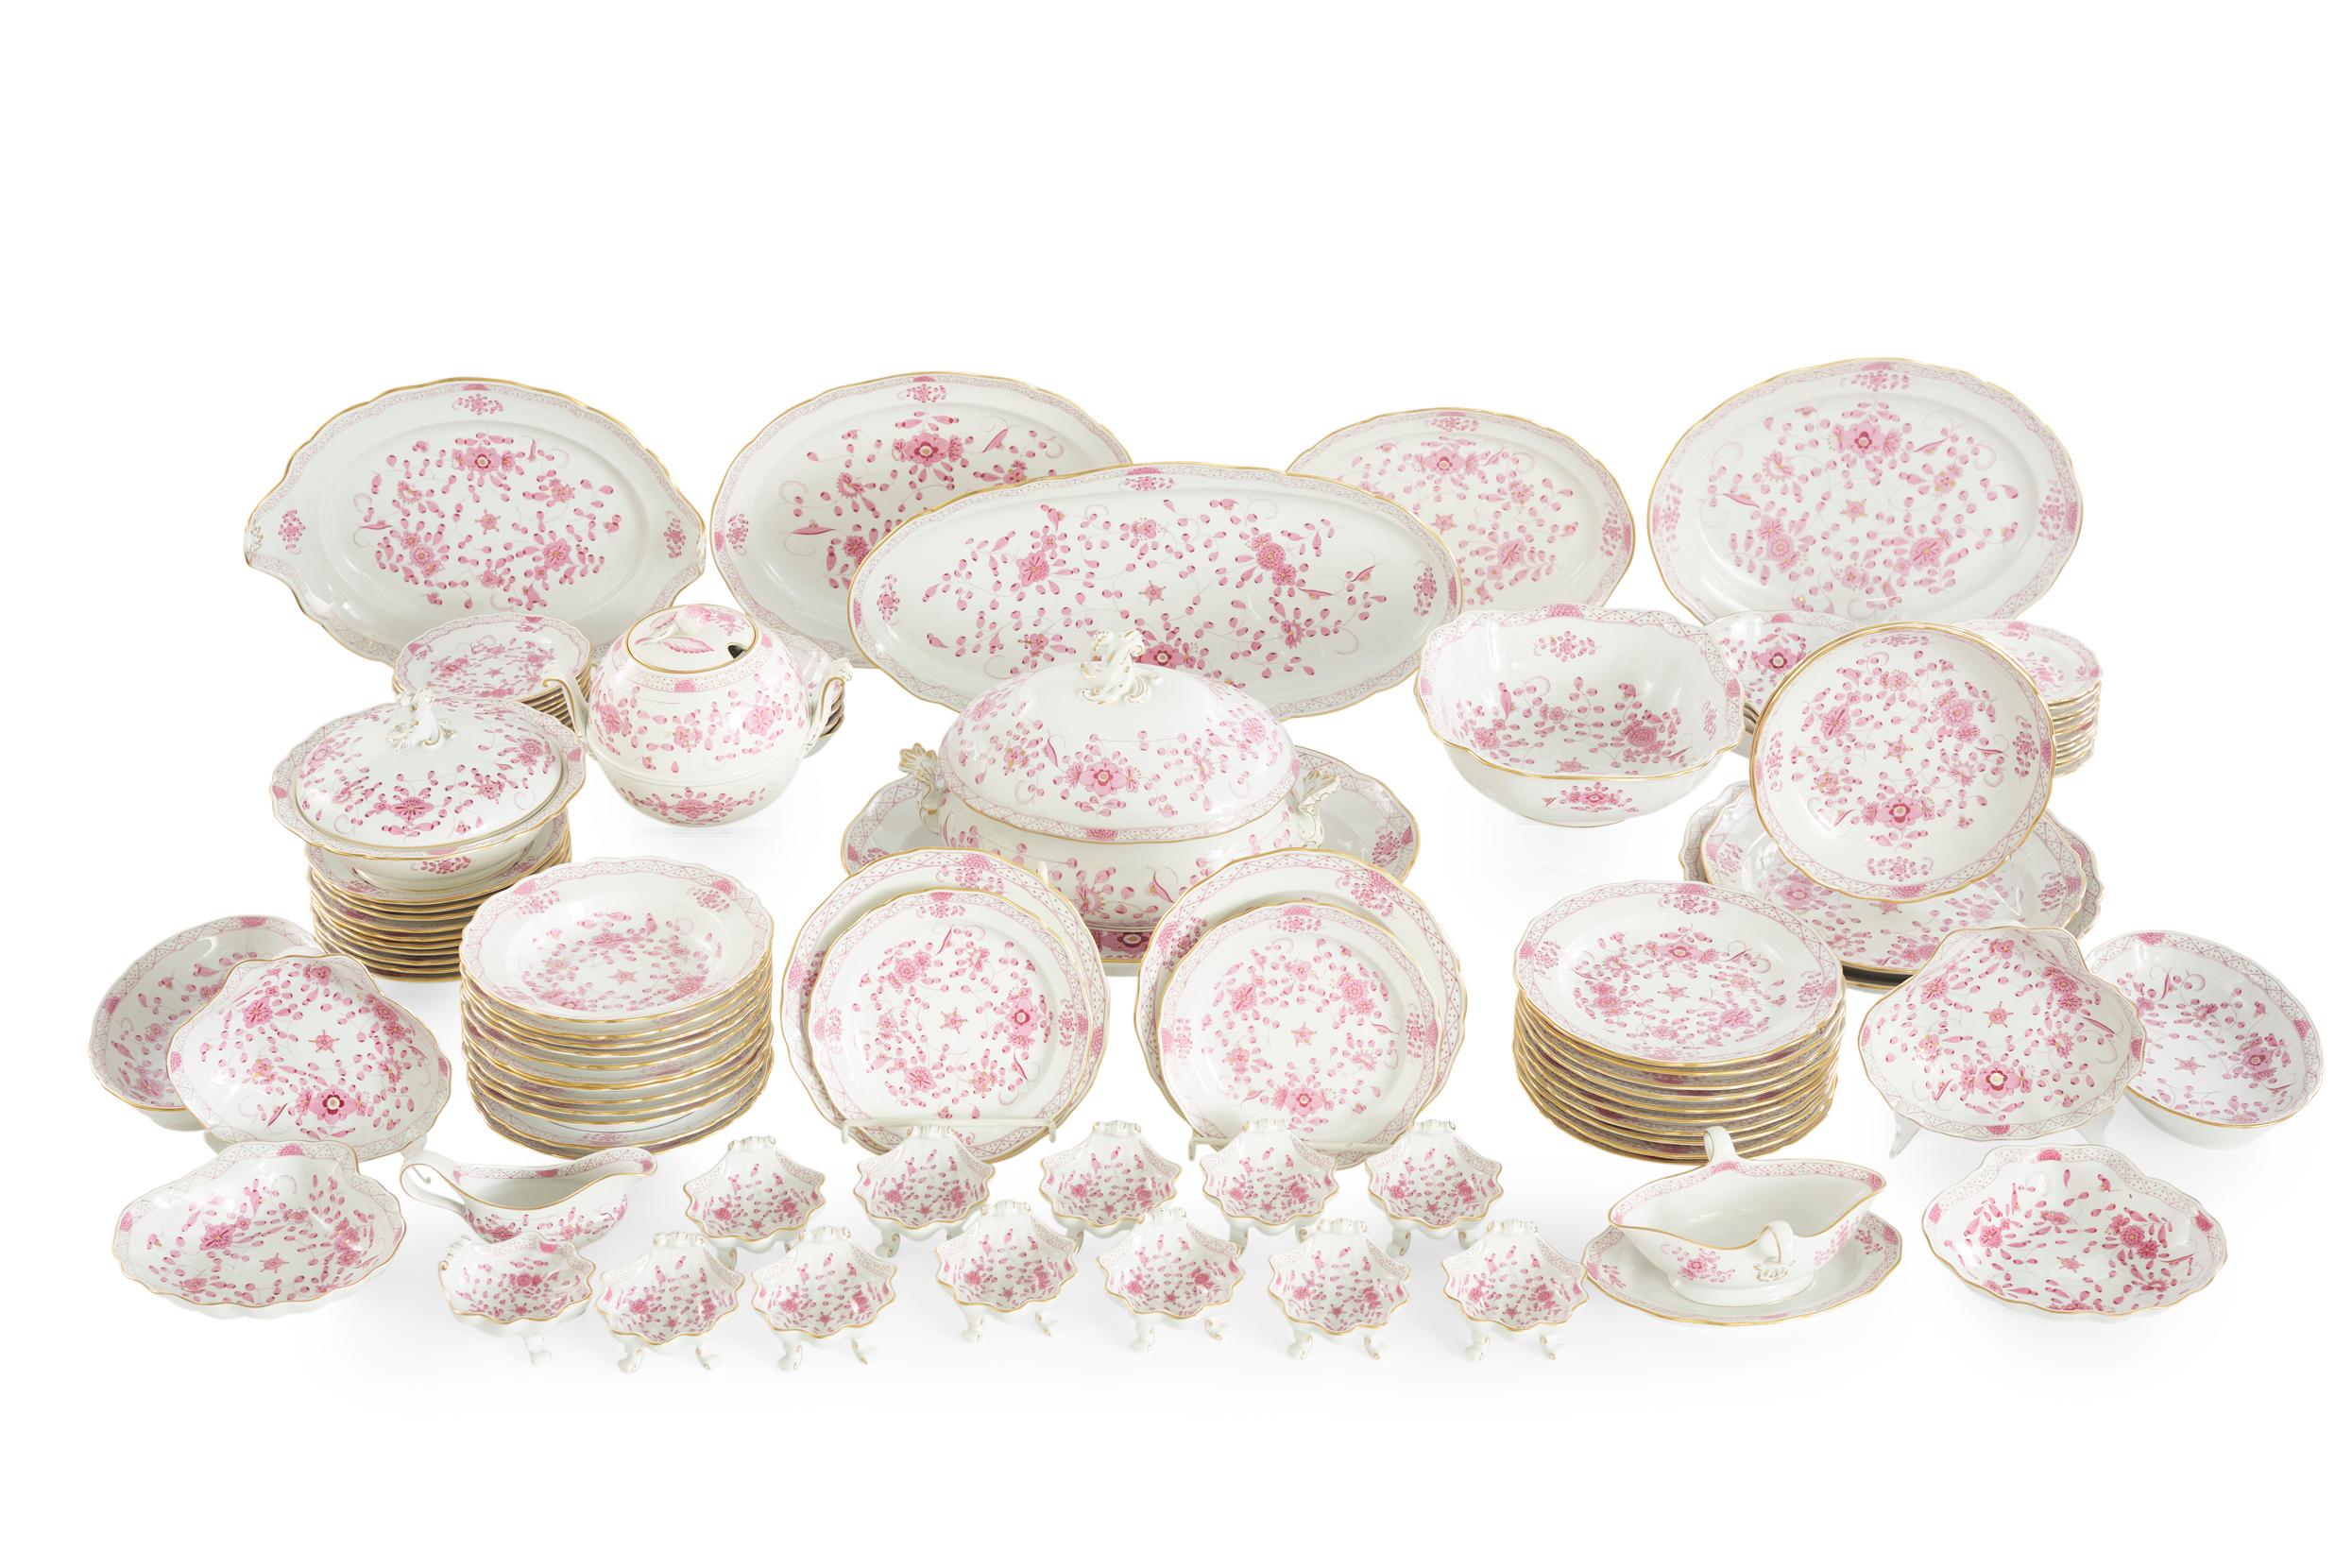 Beautiful German Meissen dinnerware service for twelve people with serving pieces. The dinnerware service is in great condition. Just exquisite & very rare to find a complete service for twelve with all the serving pieces. Each piece has a detailed